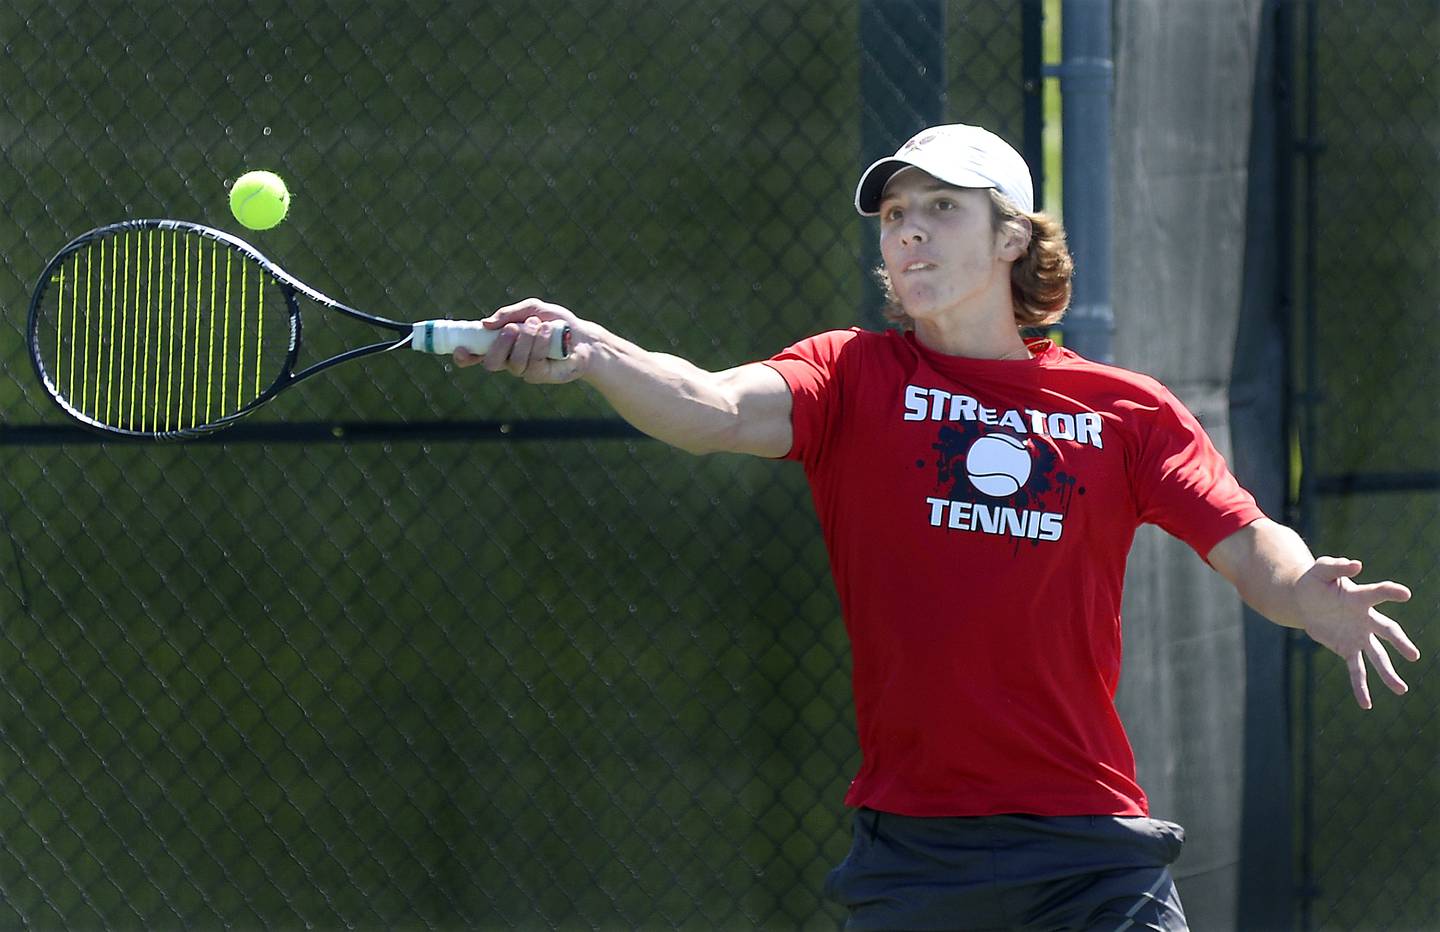 Streator’s Davey Rashid competes in a match against Metamora on Monday during the Class 1A Ottawa Boys Tennis Sectional on Monday, May 23, 2022, at Ottawa.